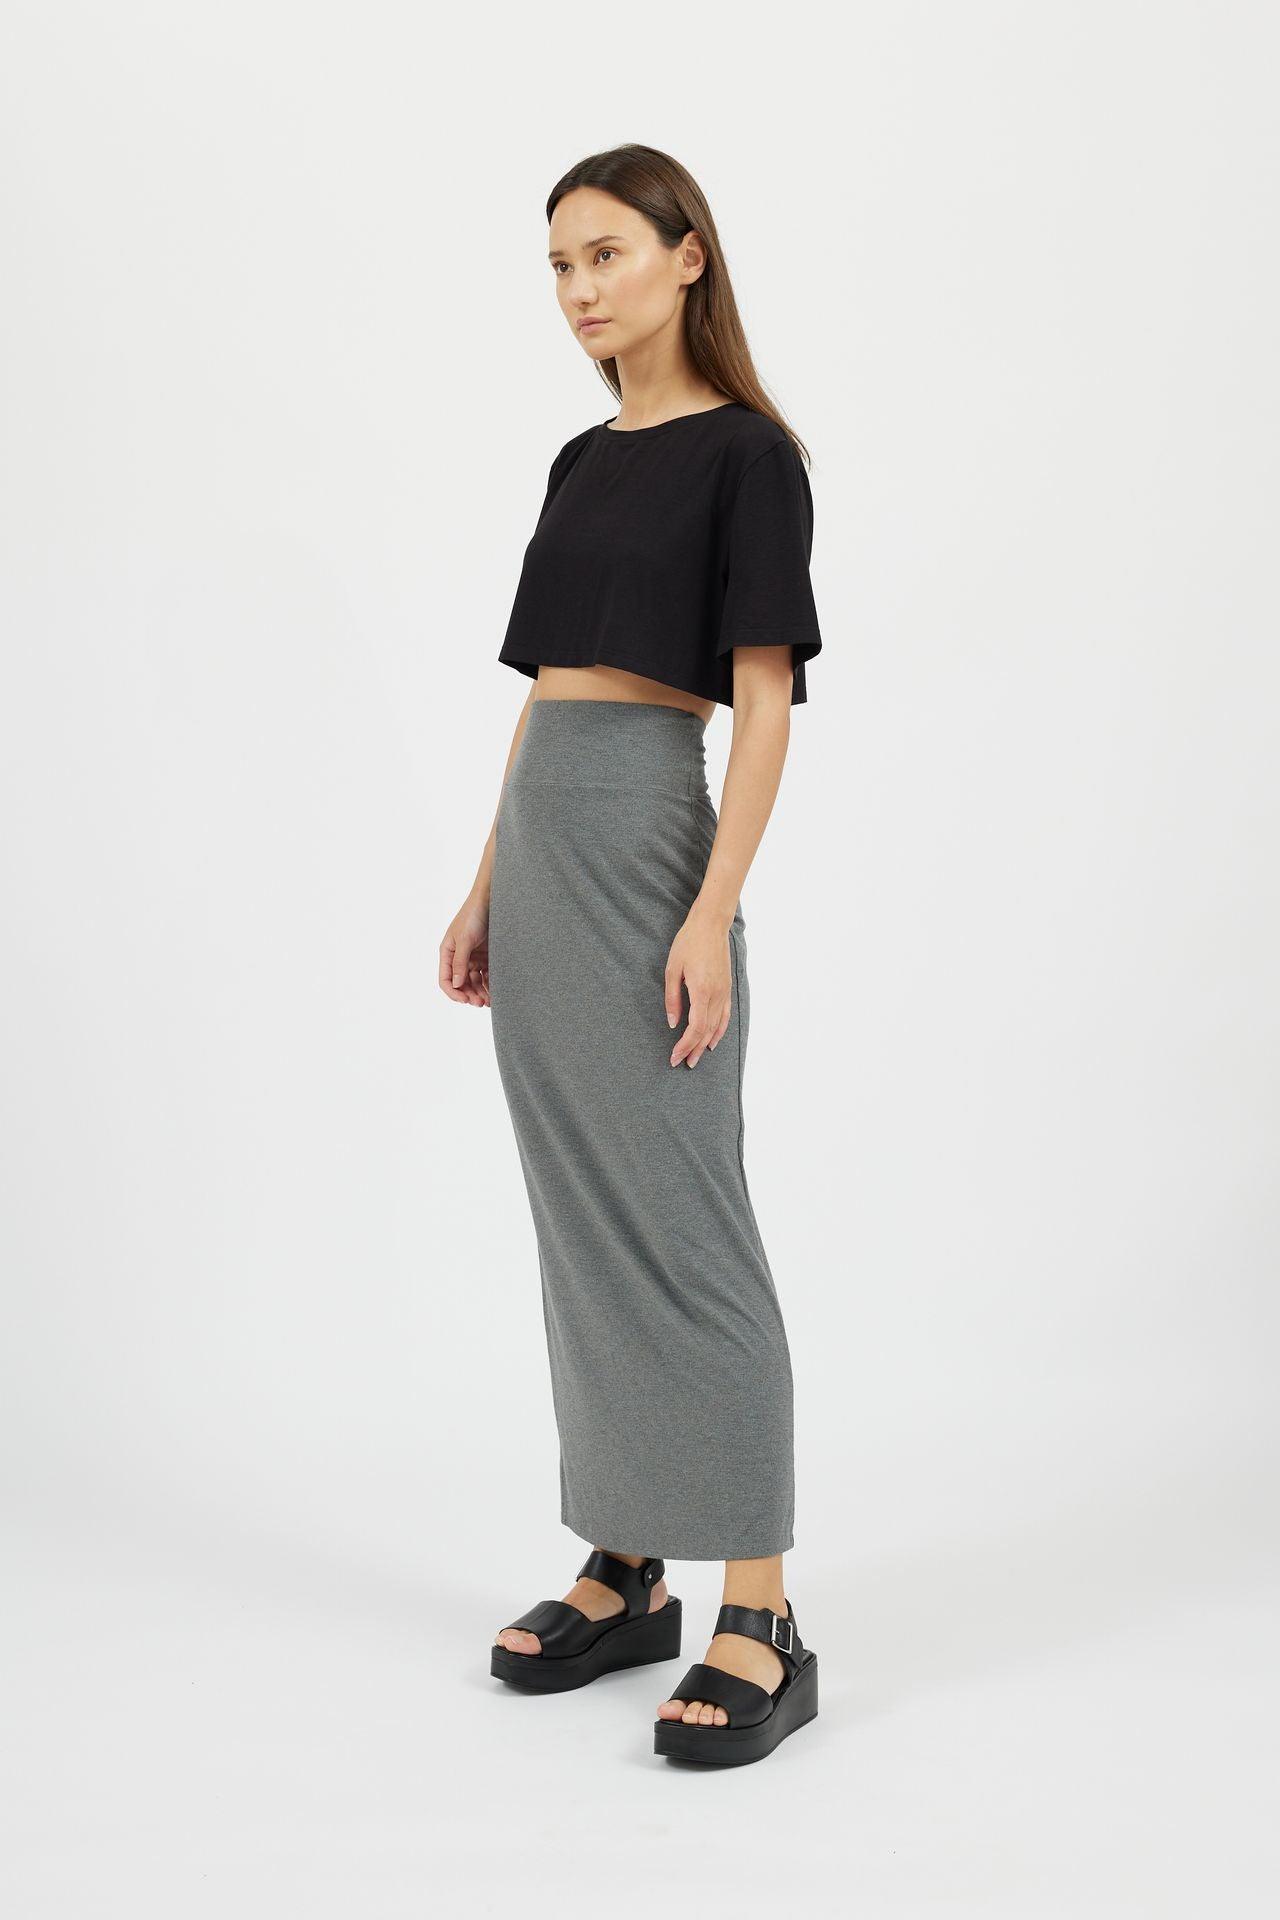 High Waisted Pencil Skirt | Labeled Skirts Not 